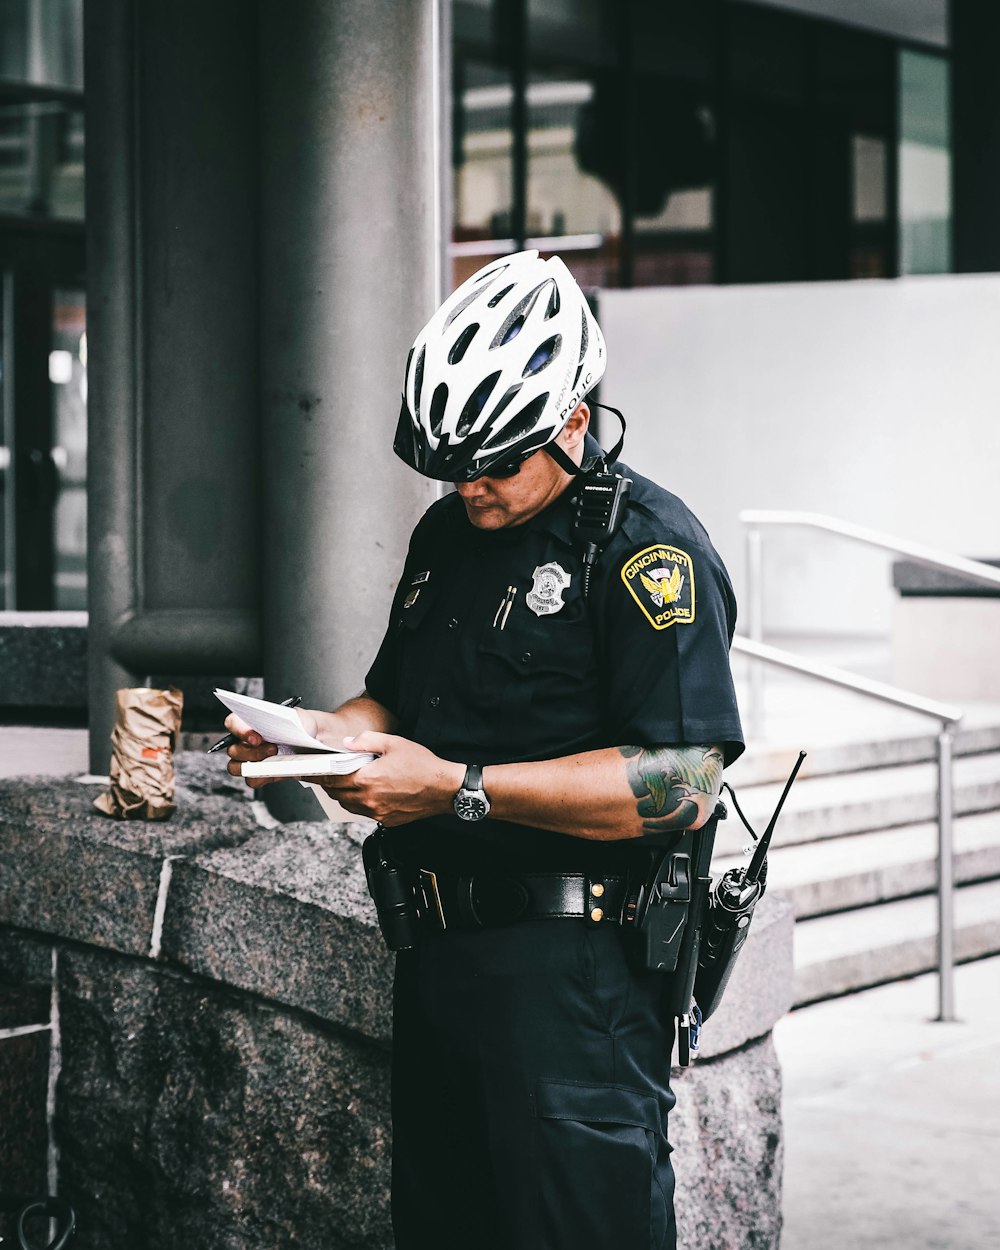 officer reading notes